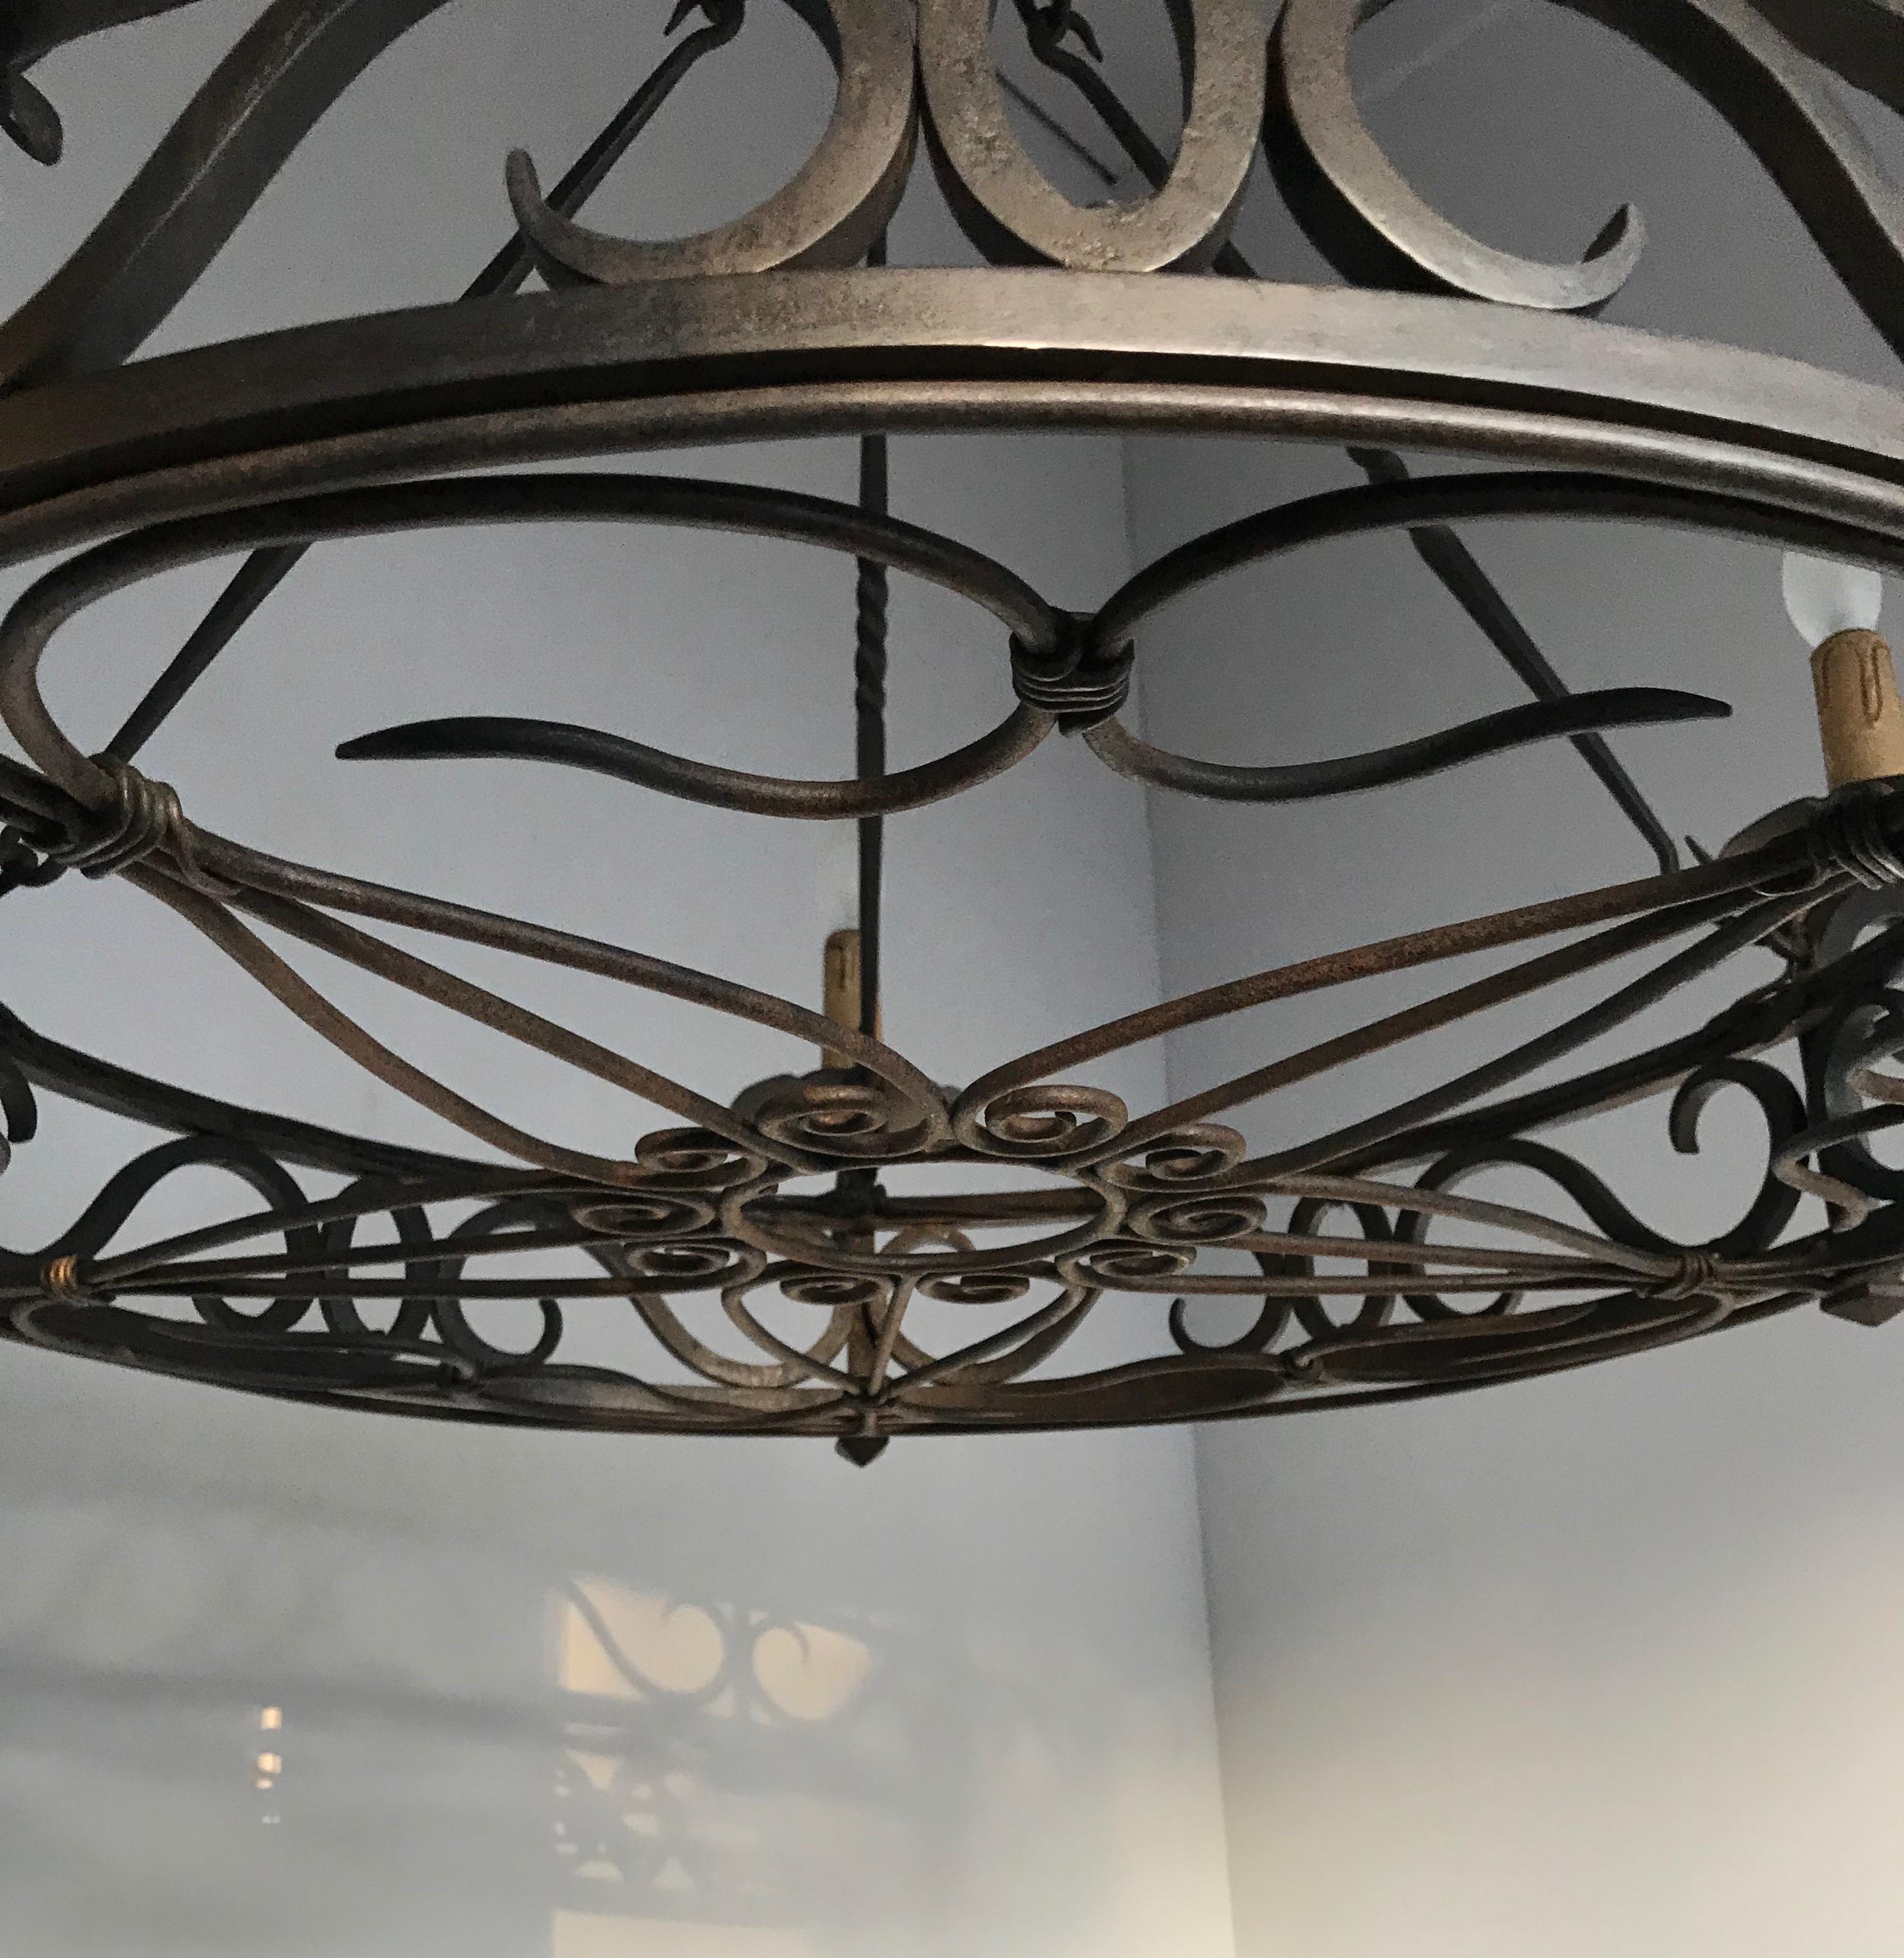 Large Arts & Crafts Wrought Iron Chandelier for Dining Room or Restaurant Etc. 8